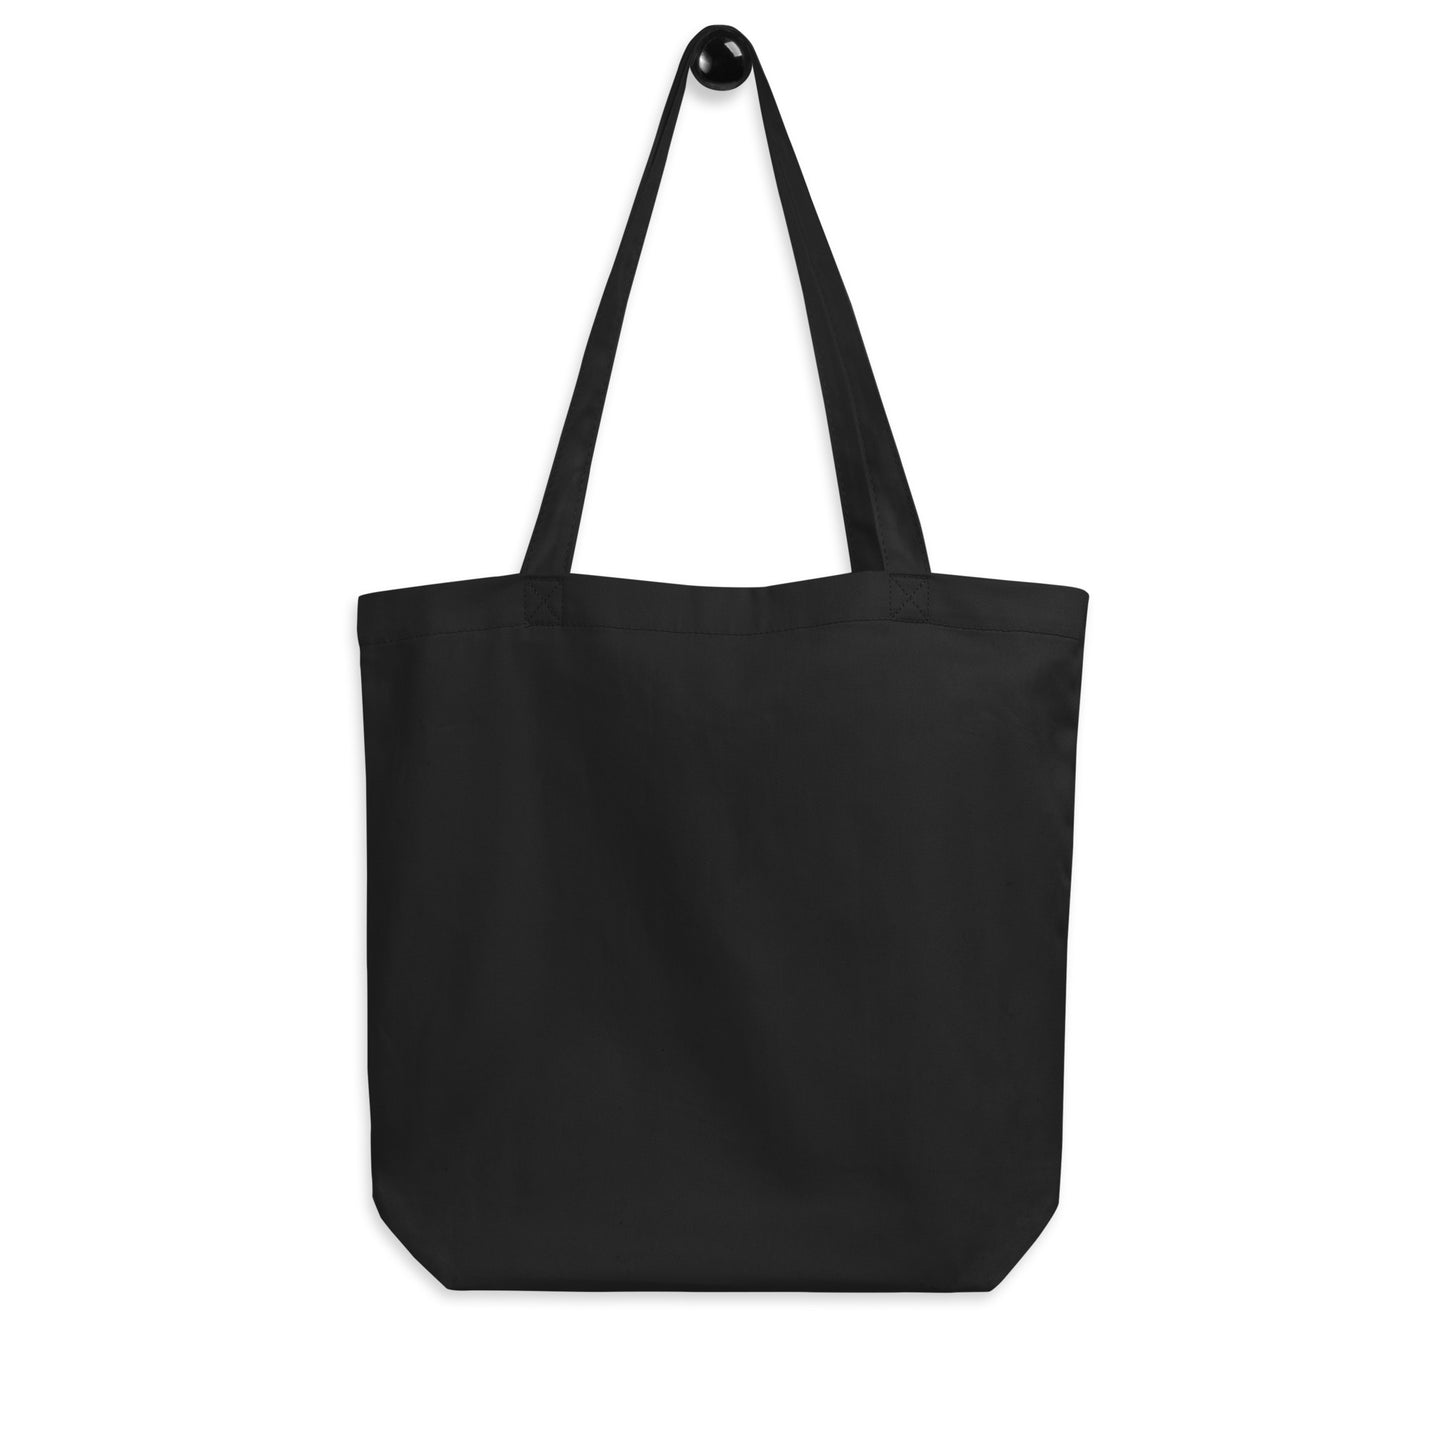 Unique Travel Gift Organic Tote - White Oval • AMS Amsterdam • YHM Designs - Image 05